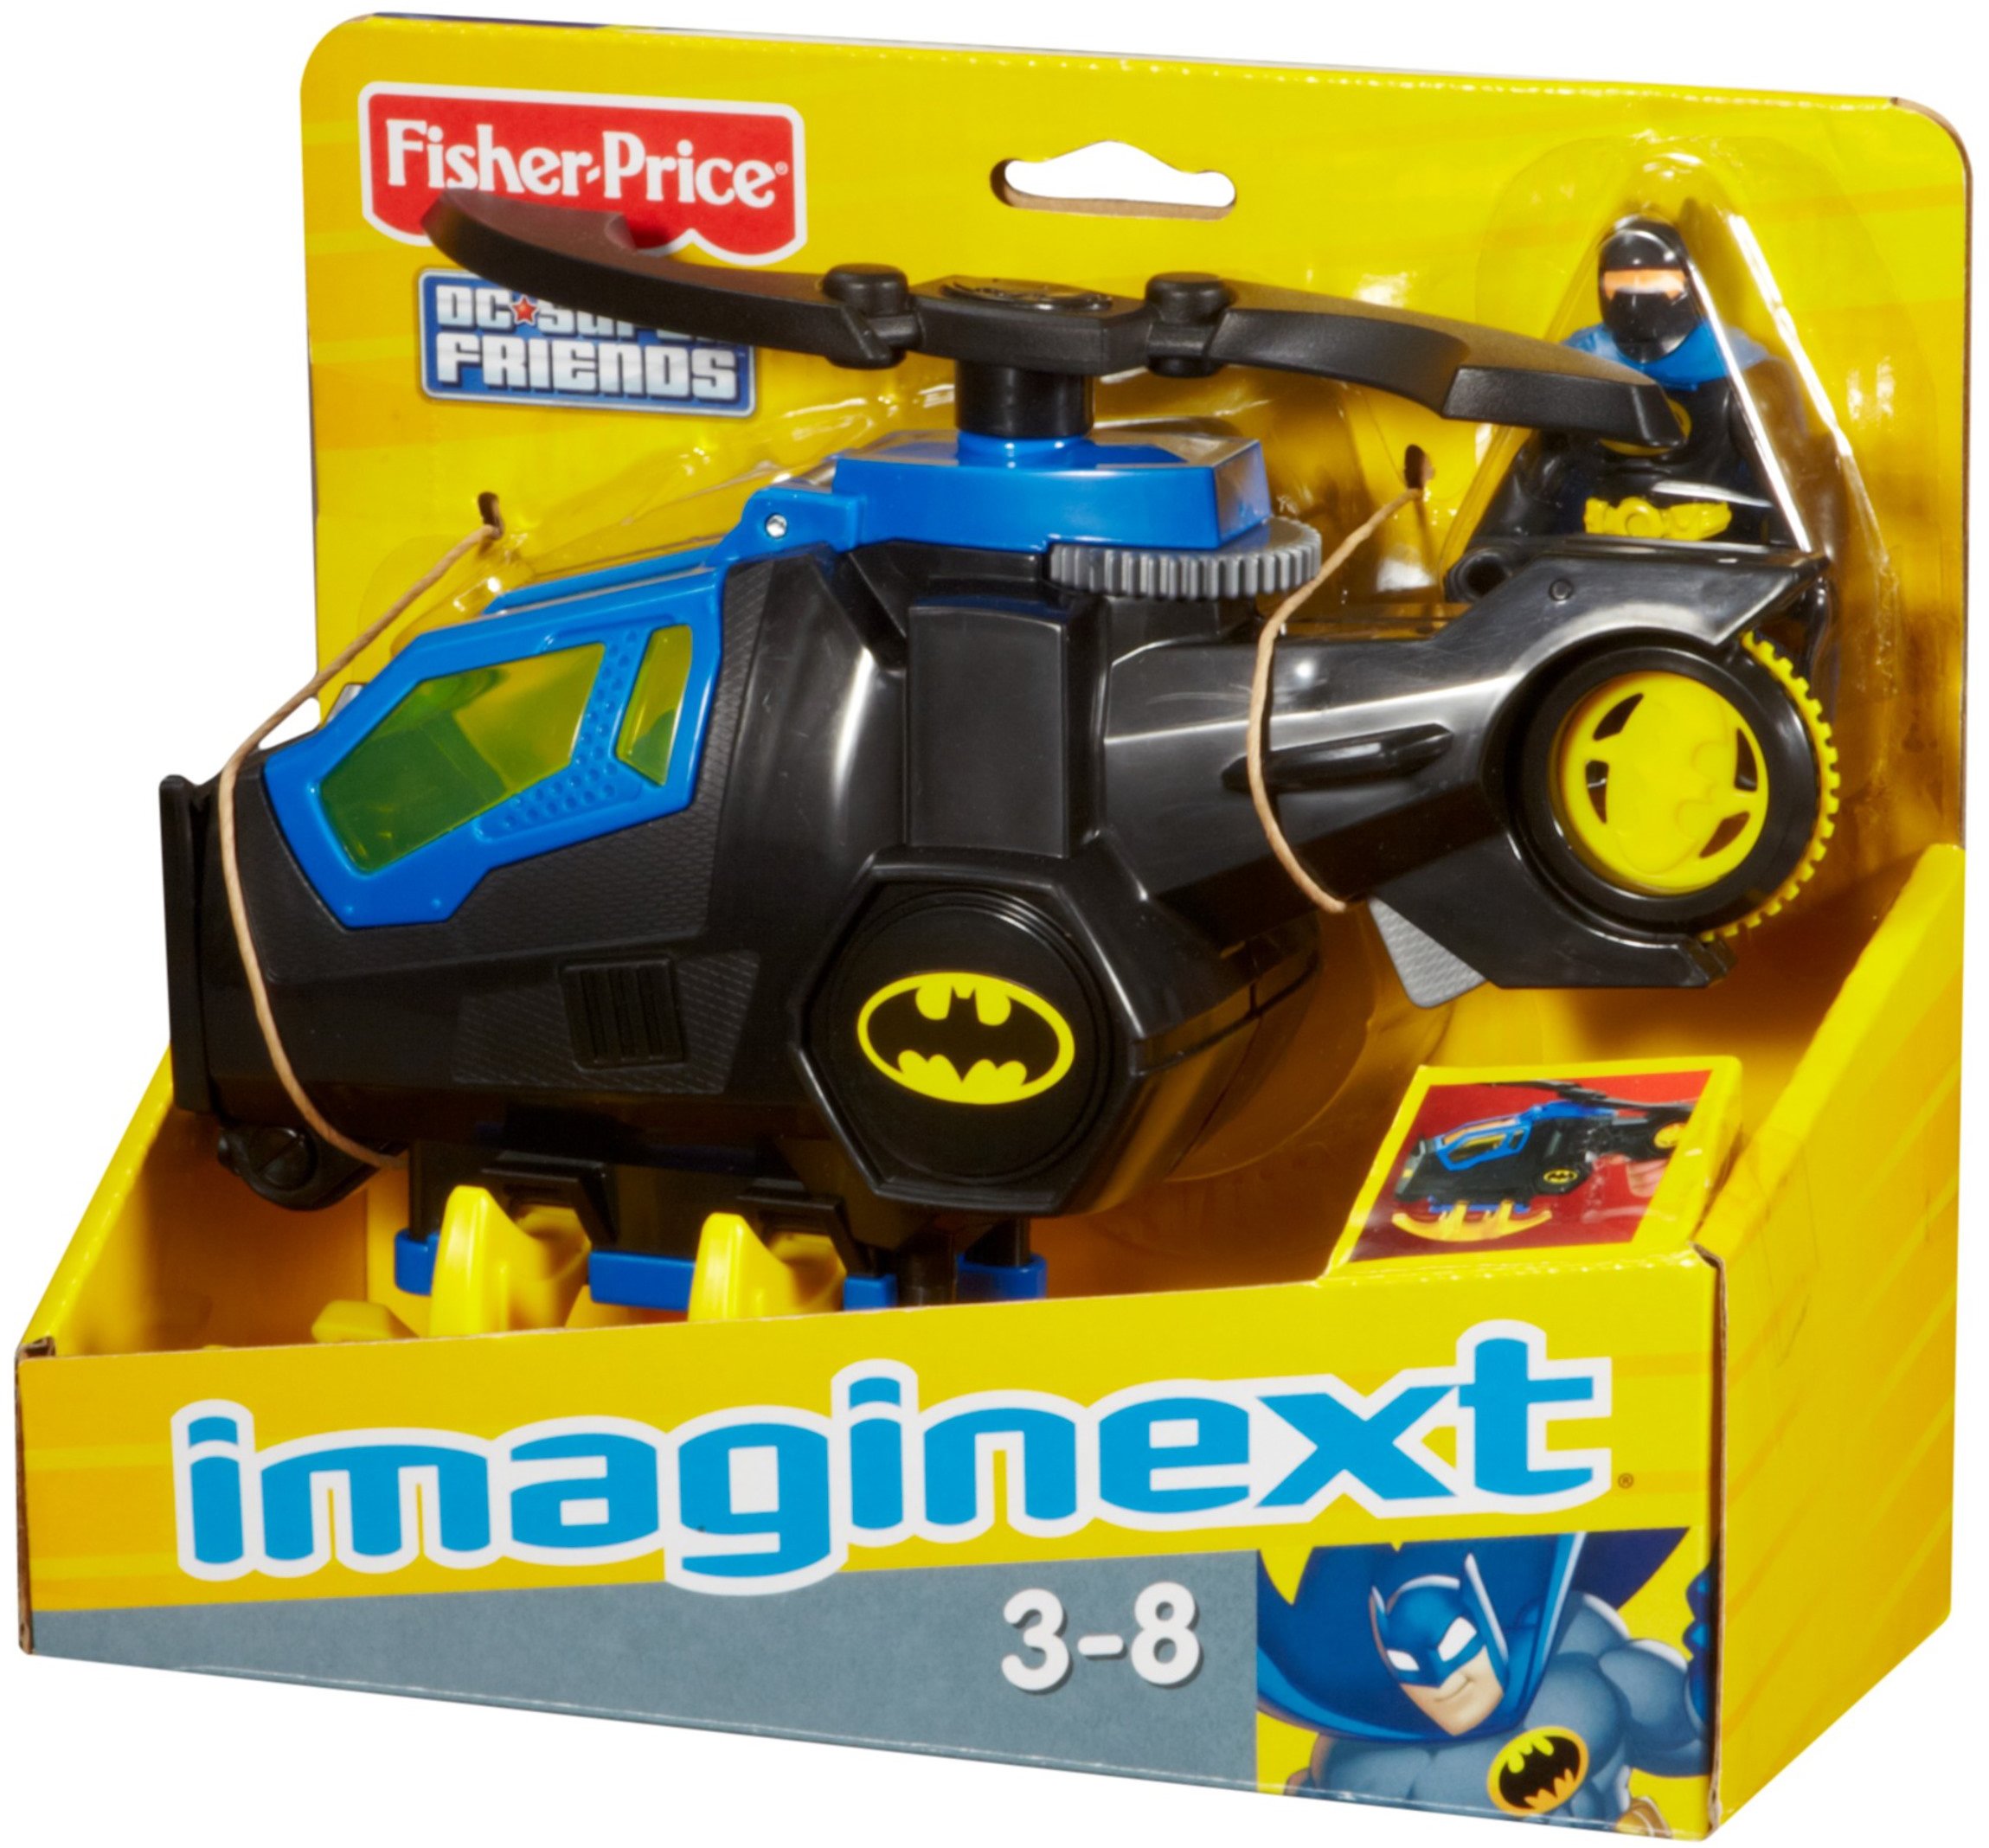 Imaginext DC Super Friends Batman Toy Helicopter with Spinning Propellers and Batman Figure for Preschool Pretend Play (Amazon Exclusive)